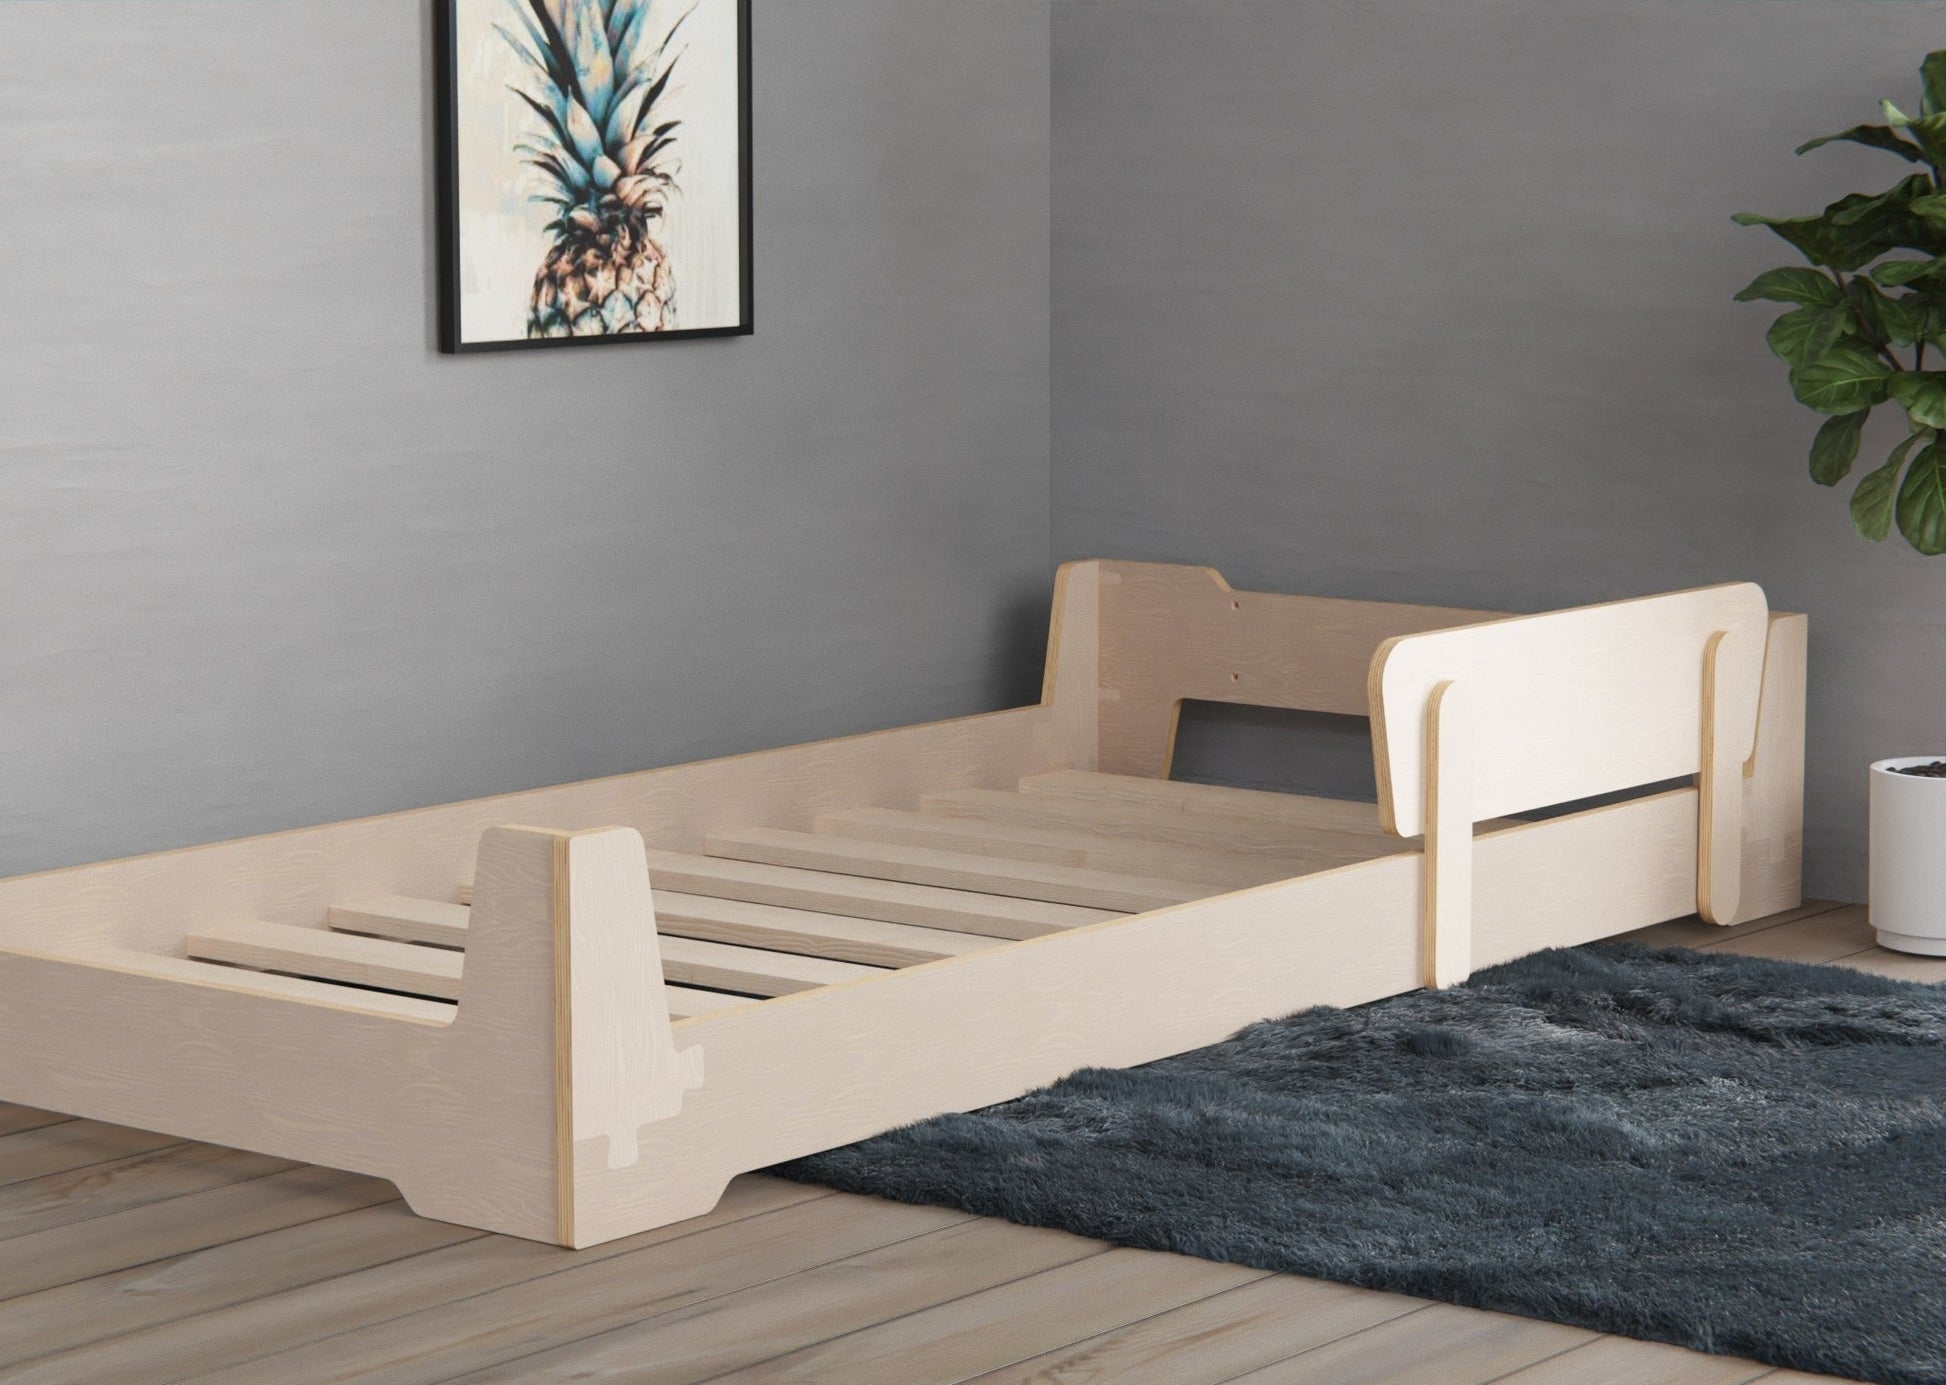 Elevate your child's bedroom with our flippable kids bed frame, thoughtfully designed with the Montessori method in mind. Start low for easy entry and exit, flip it to a regular floor bed for growing teenagers and adults. Enhance functionality with an optional spacious drawer.